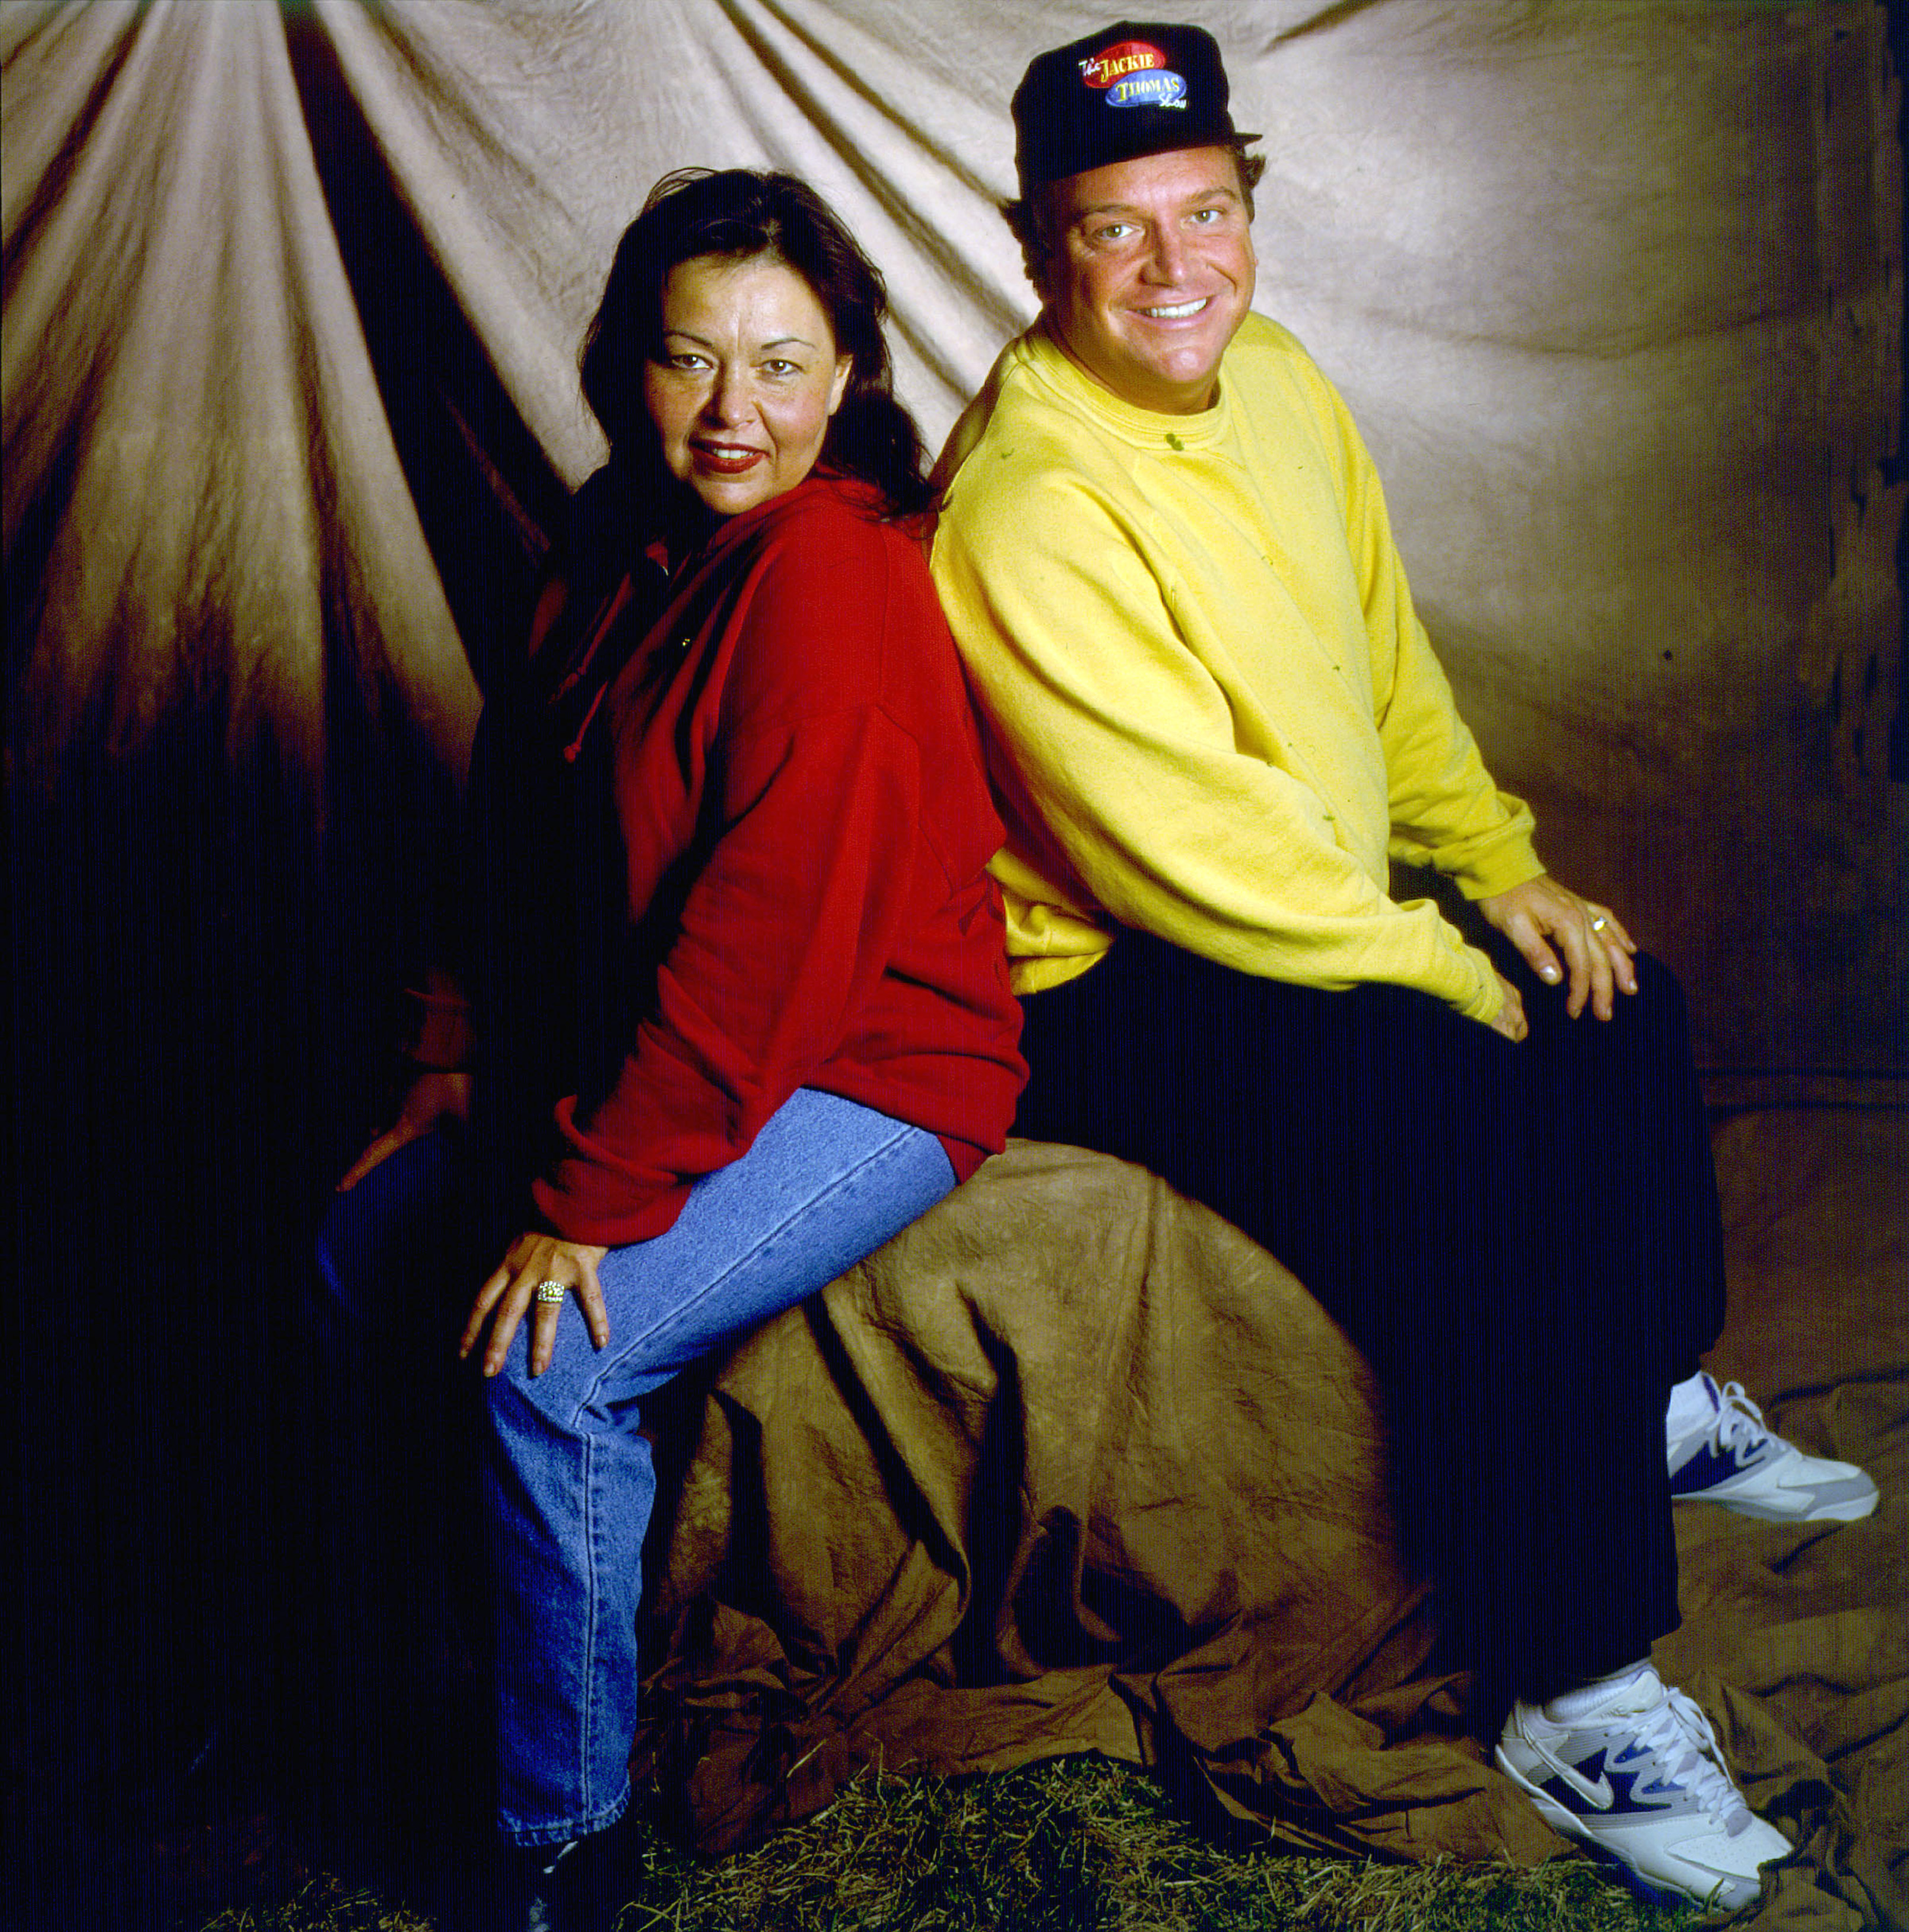 Roseanne Barr and Tom Arnold backstage at Farm Aid in Iowa, 1992 | Source: Getty Images